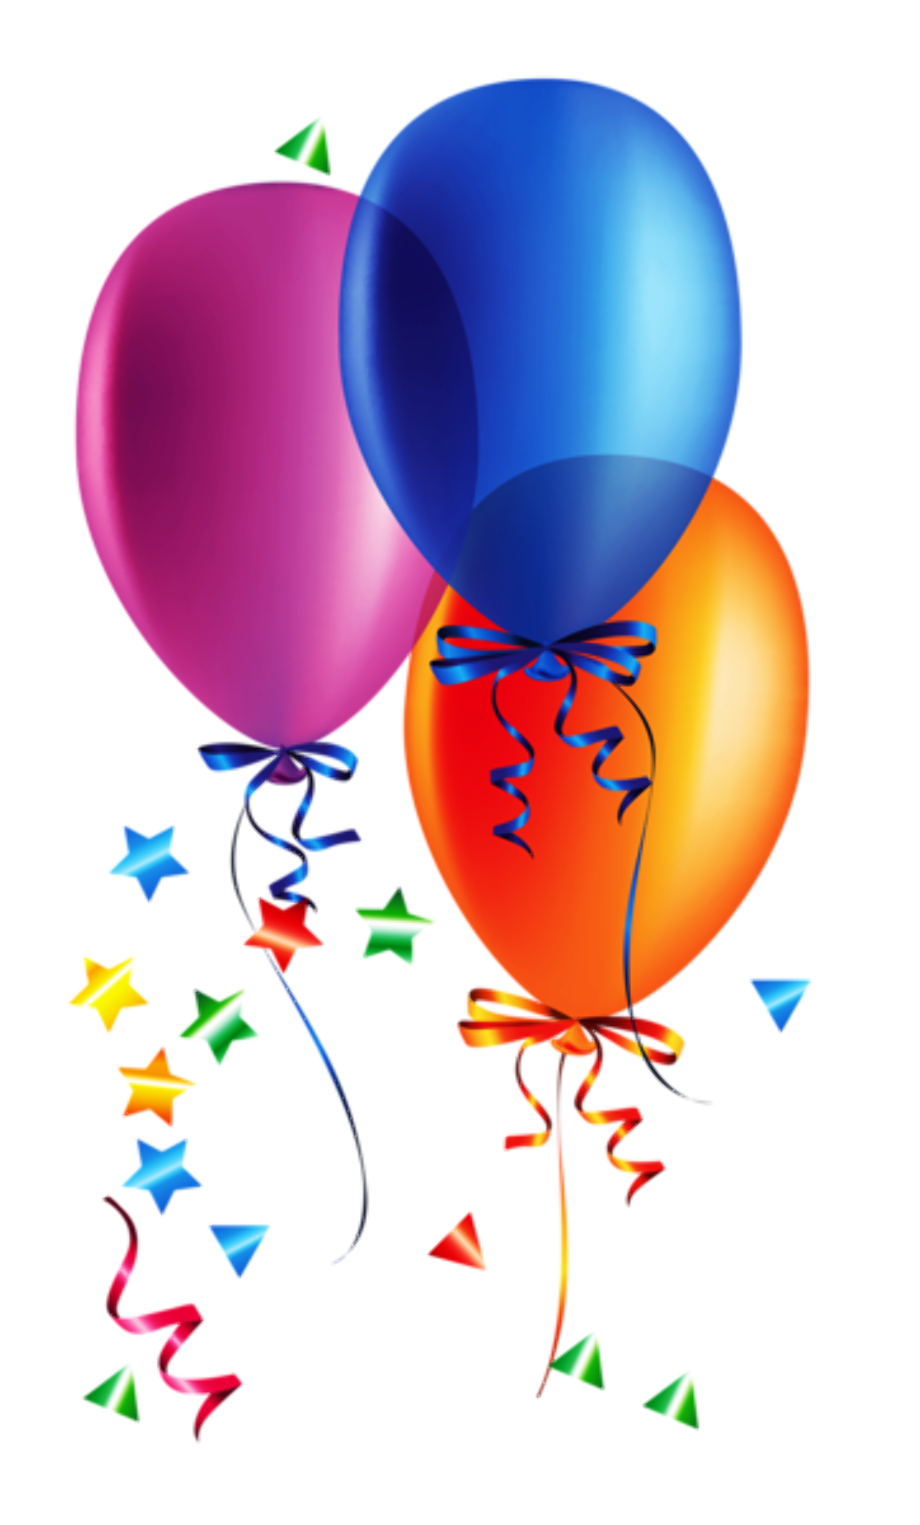 Free Clipart Balloons And Confetti : Clipart Balloons And Confetti 20 ...